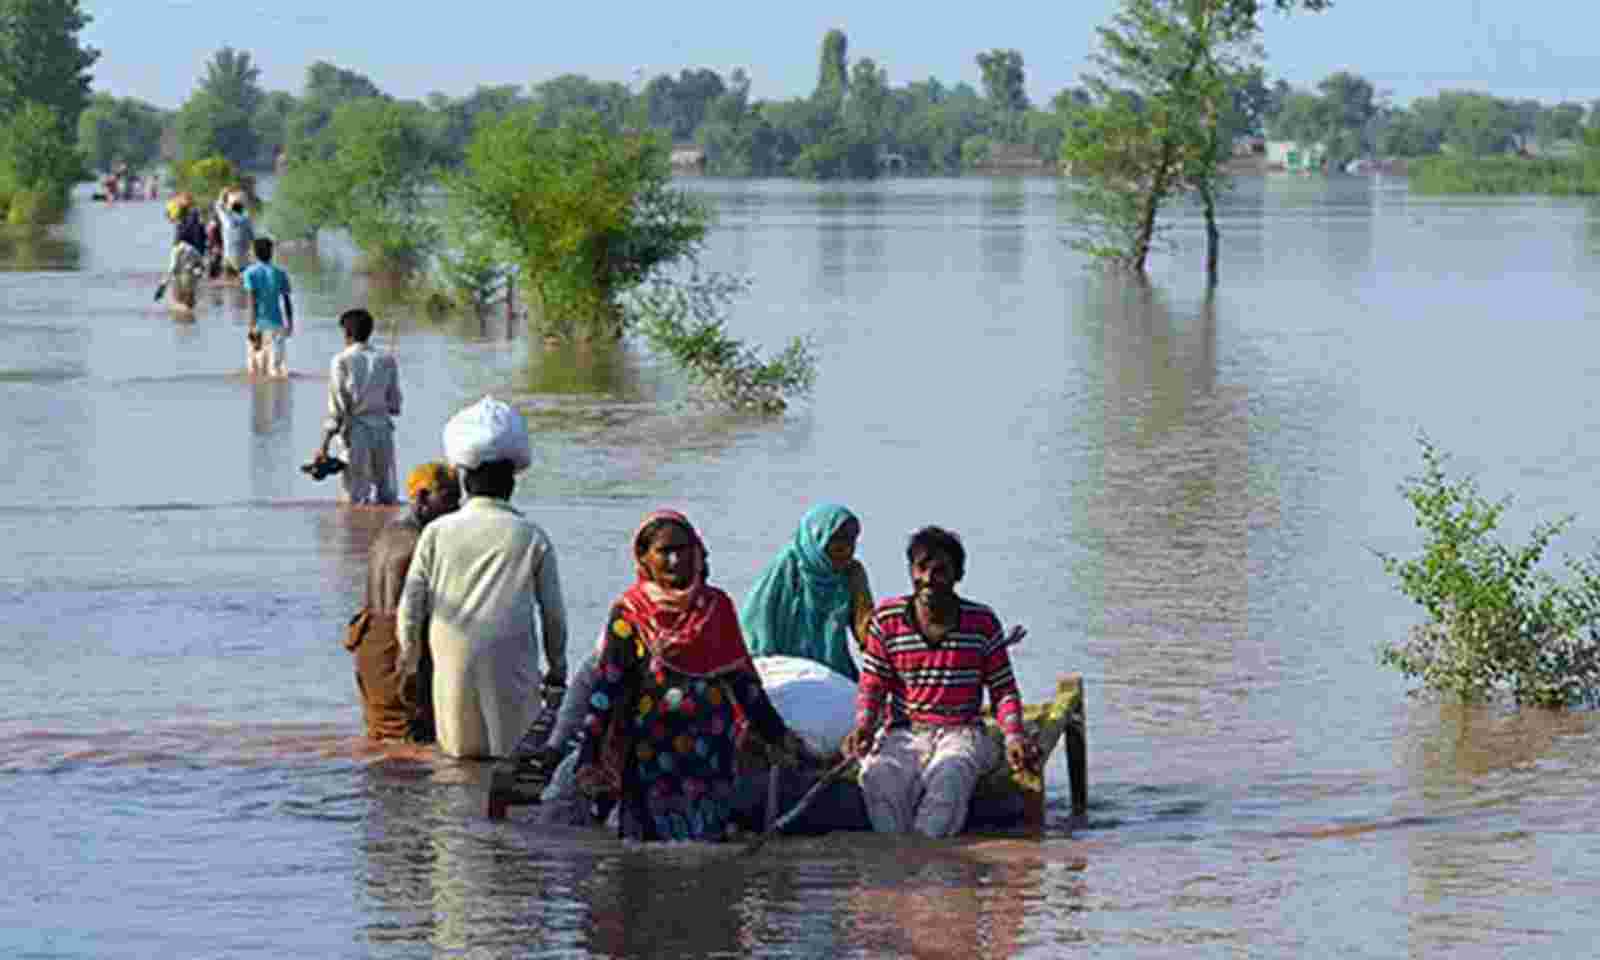 Pakistan appeals for international assistance following historic flooding